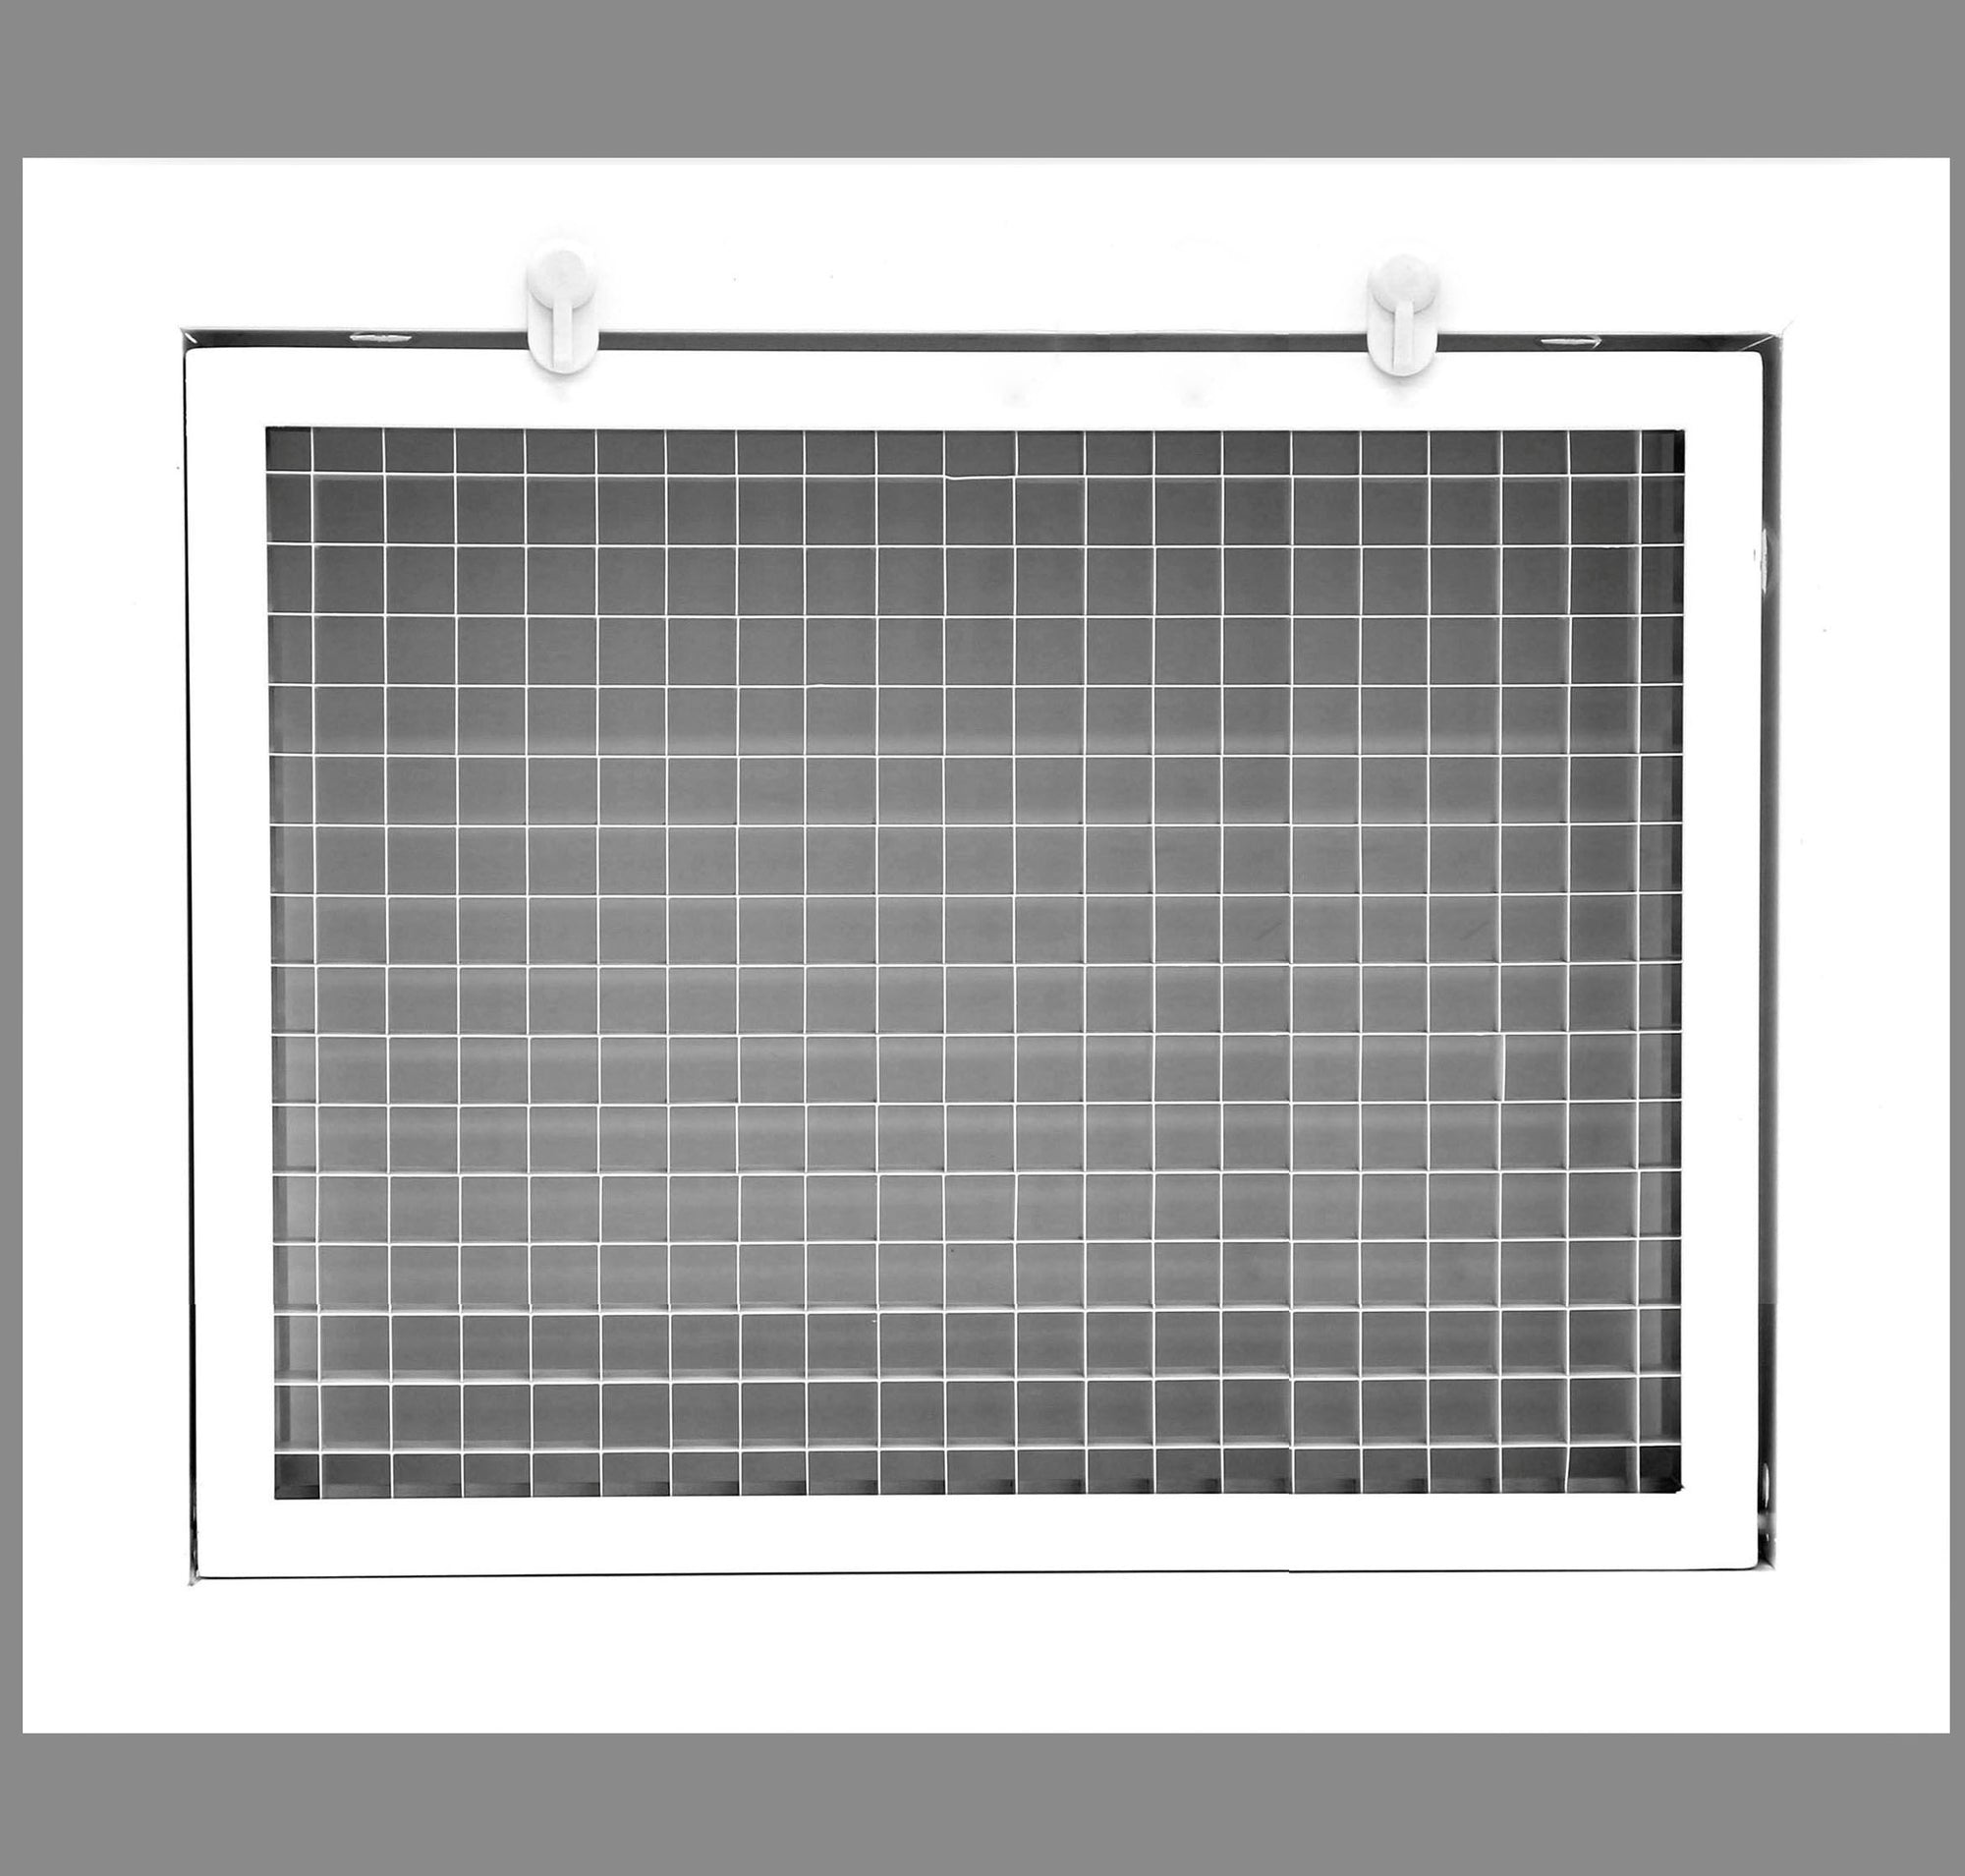 10" x 6" Cube Core Eggcrate Return Air Filter Grille for 1" Filter